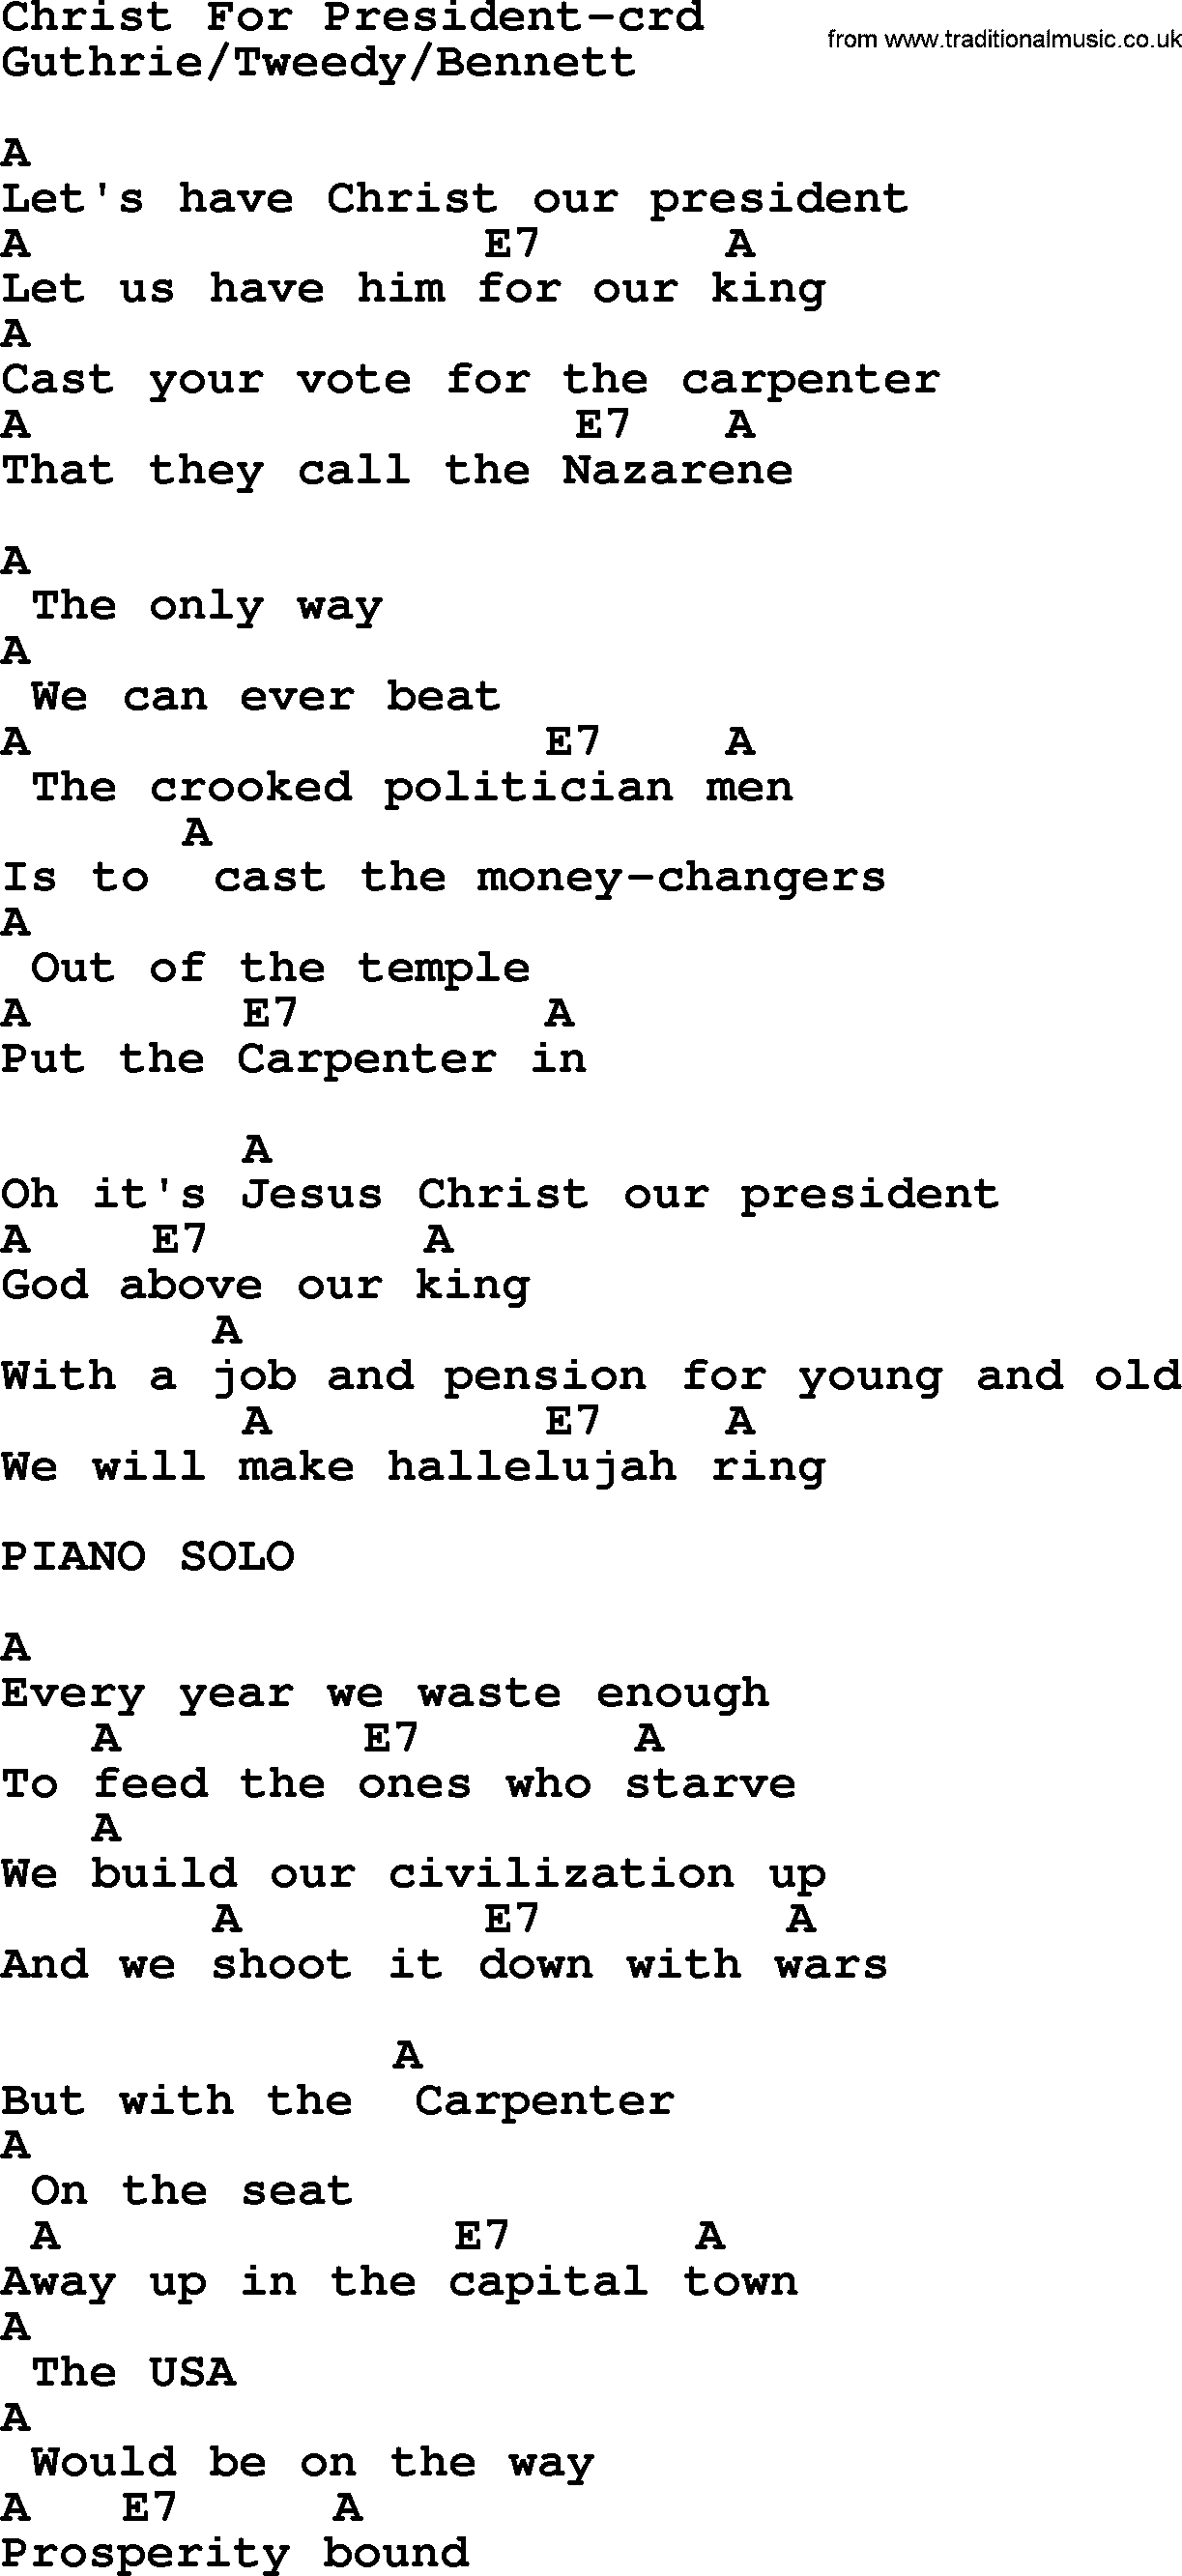 Woody Guthrie song Christ For President lyrics and chords